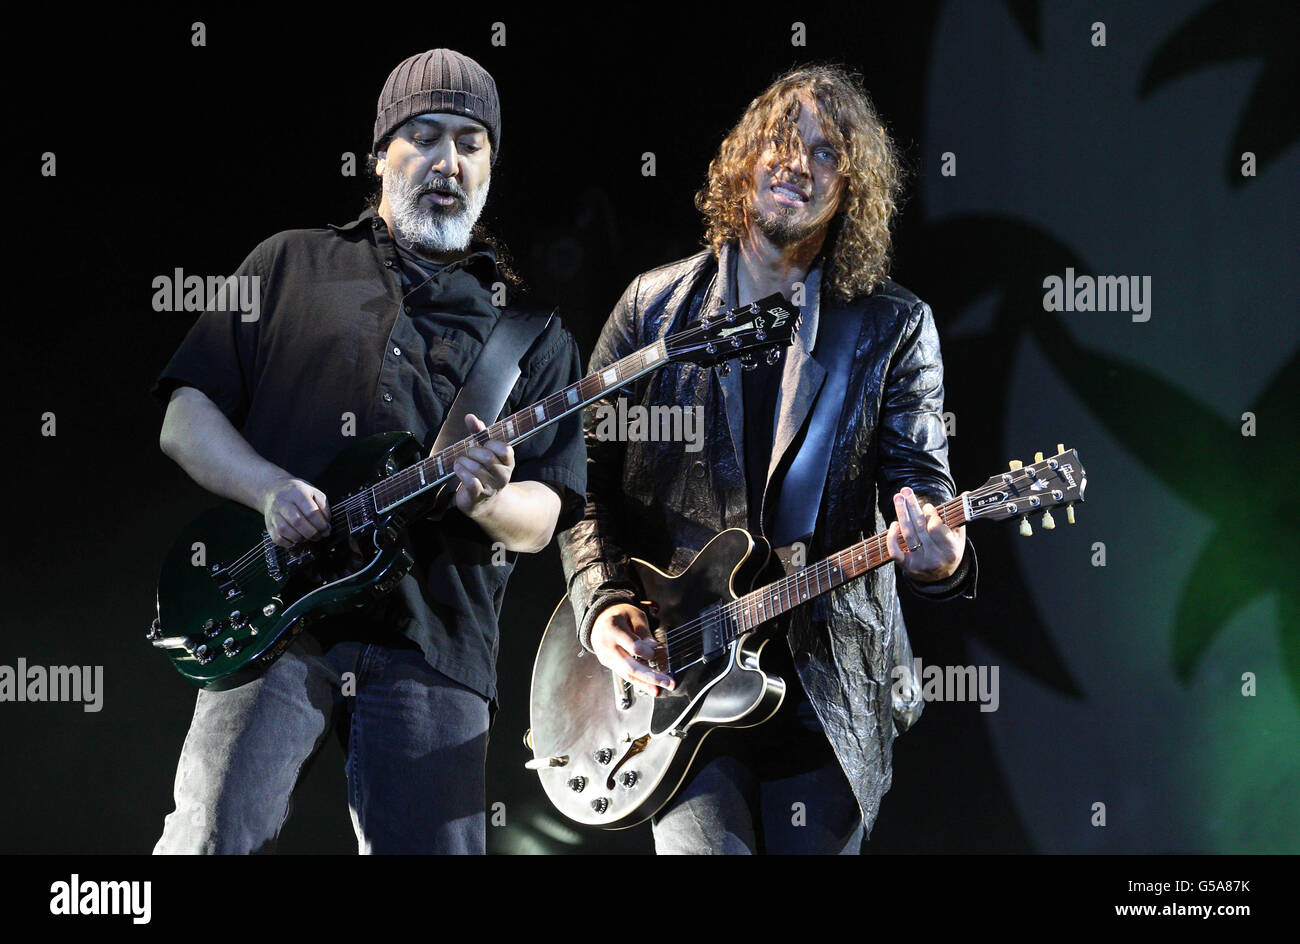 Kim Thayil (left) and Chris Cornell of Soundgarden perform at the Hard Rock Calling music festival in Hyde Park, London. Stock Photo